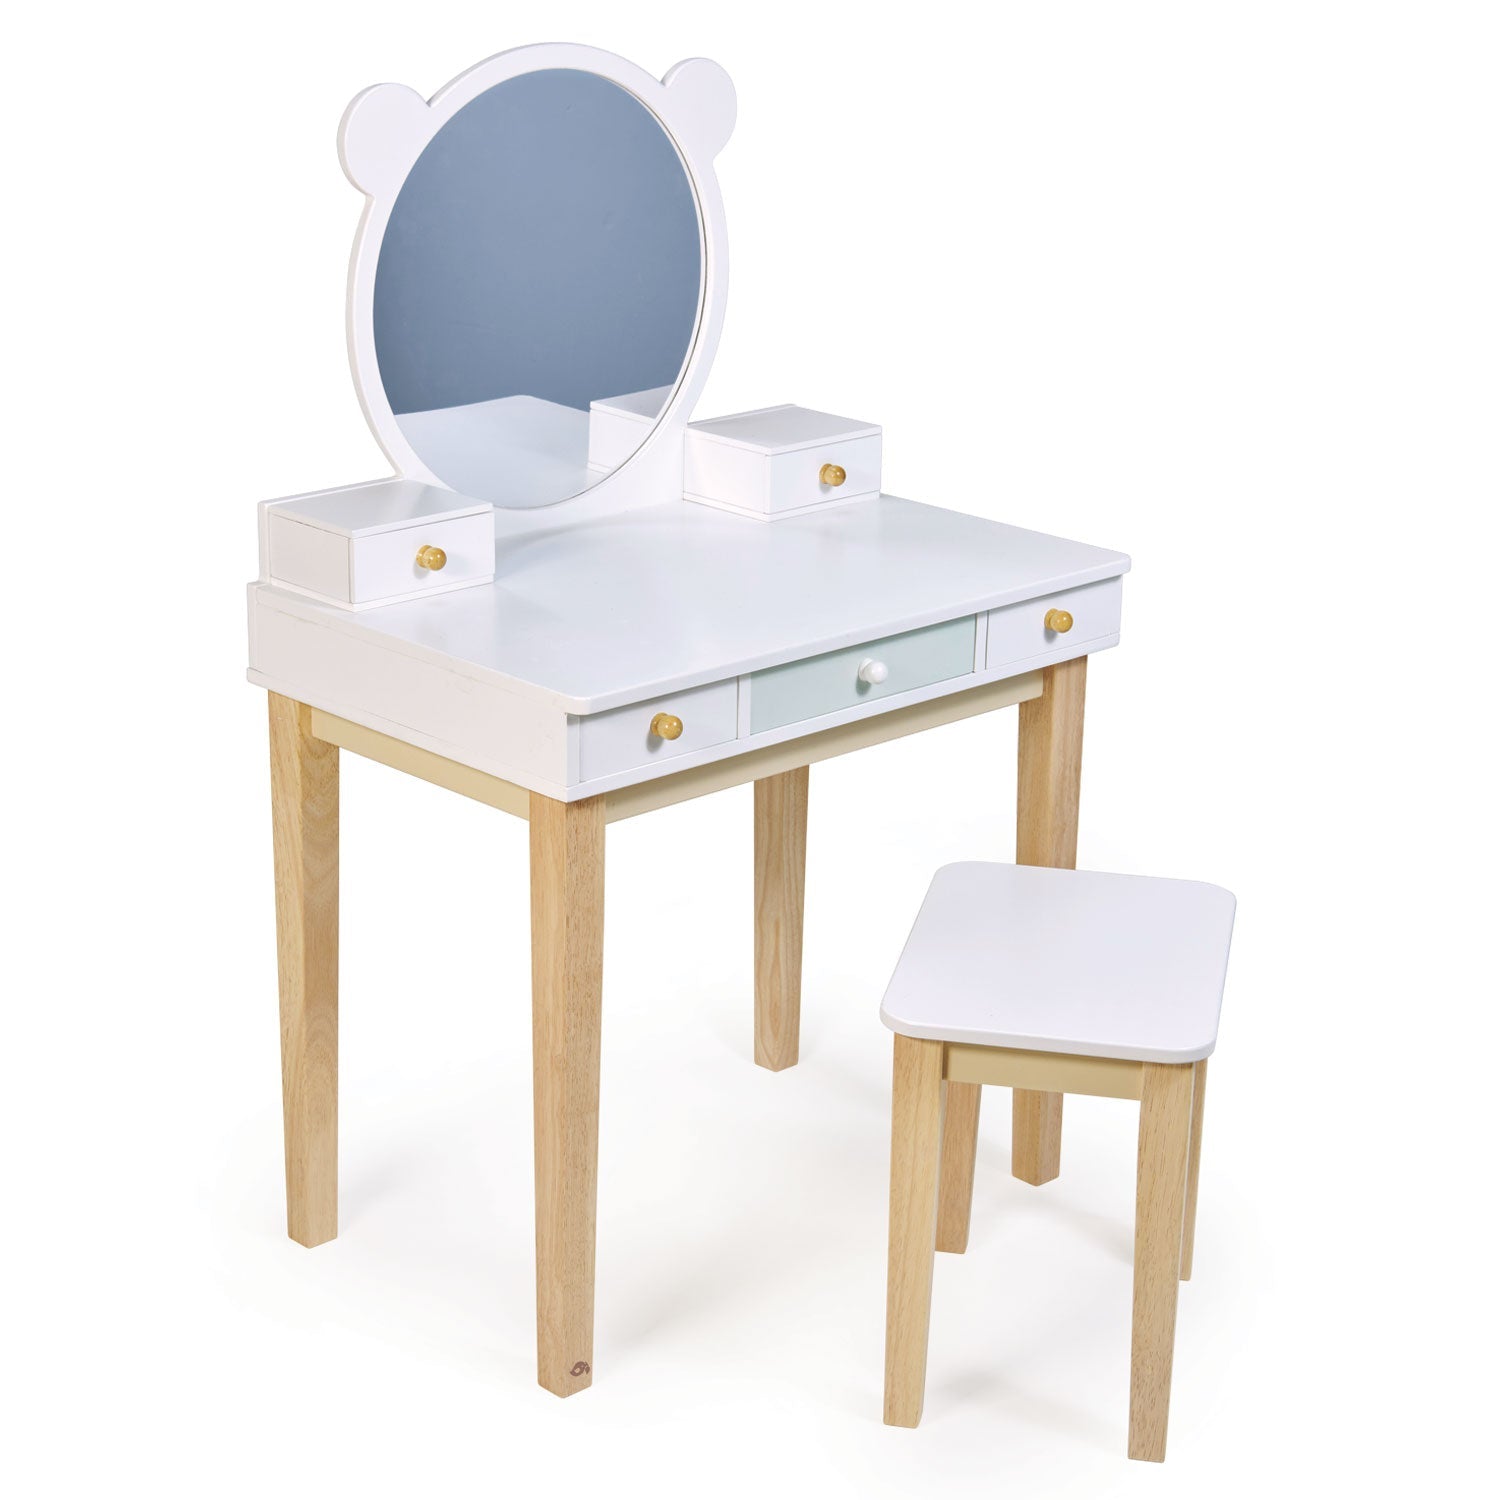 ender Leaf Toys Forest Dressing Table - A part of the forest furniture collection, this dressing table and stool are suitable for both boys and girls. Includes 5 drawers and a large round mirror inspired by forest animals